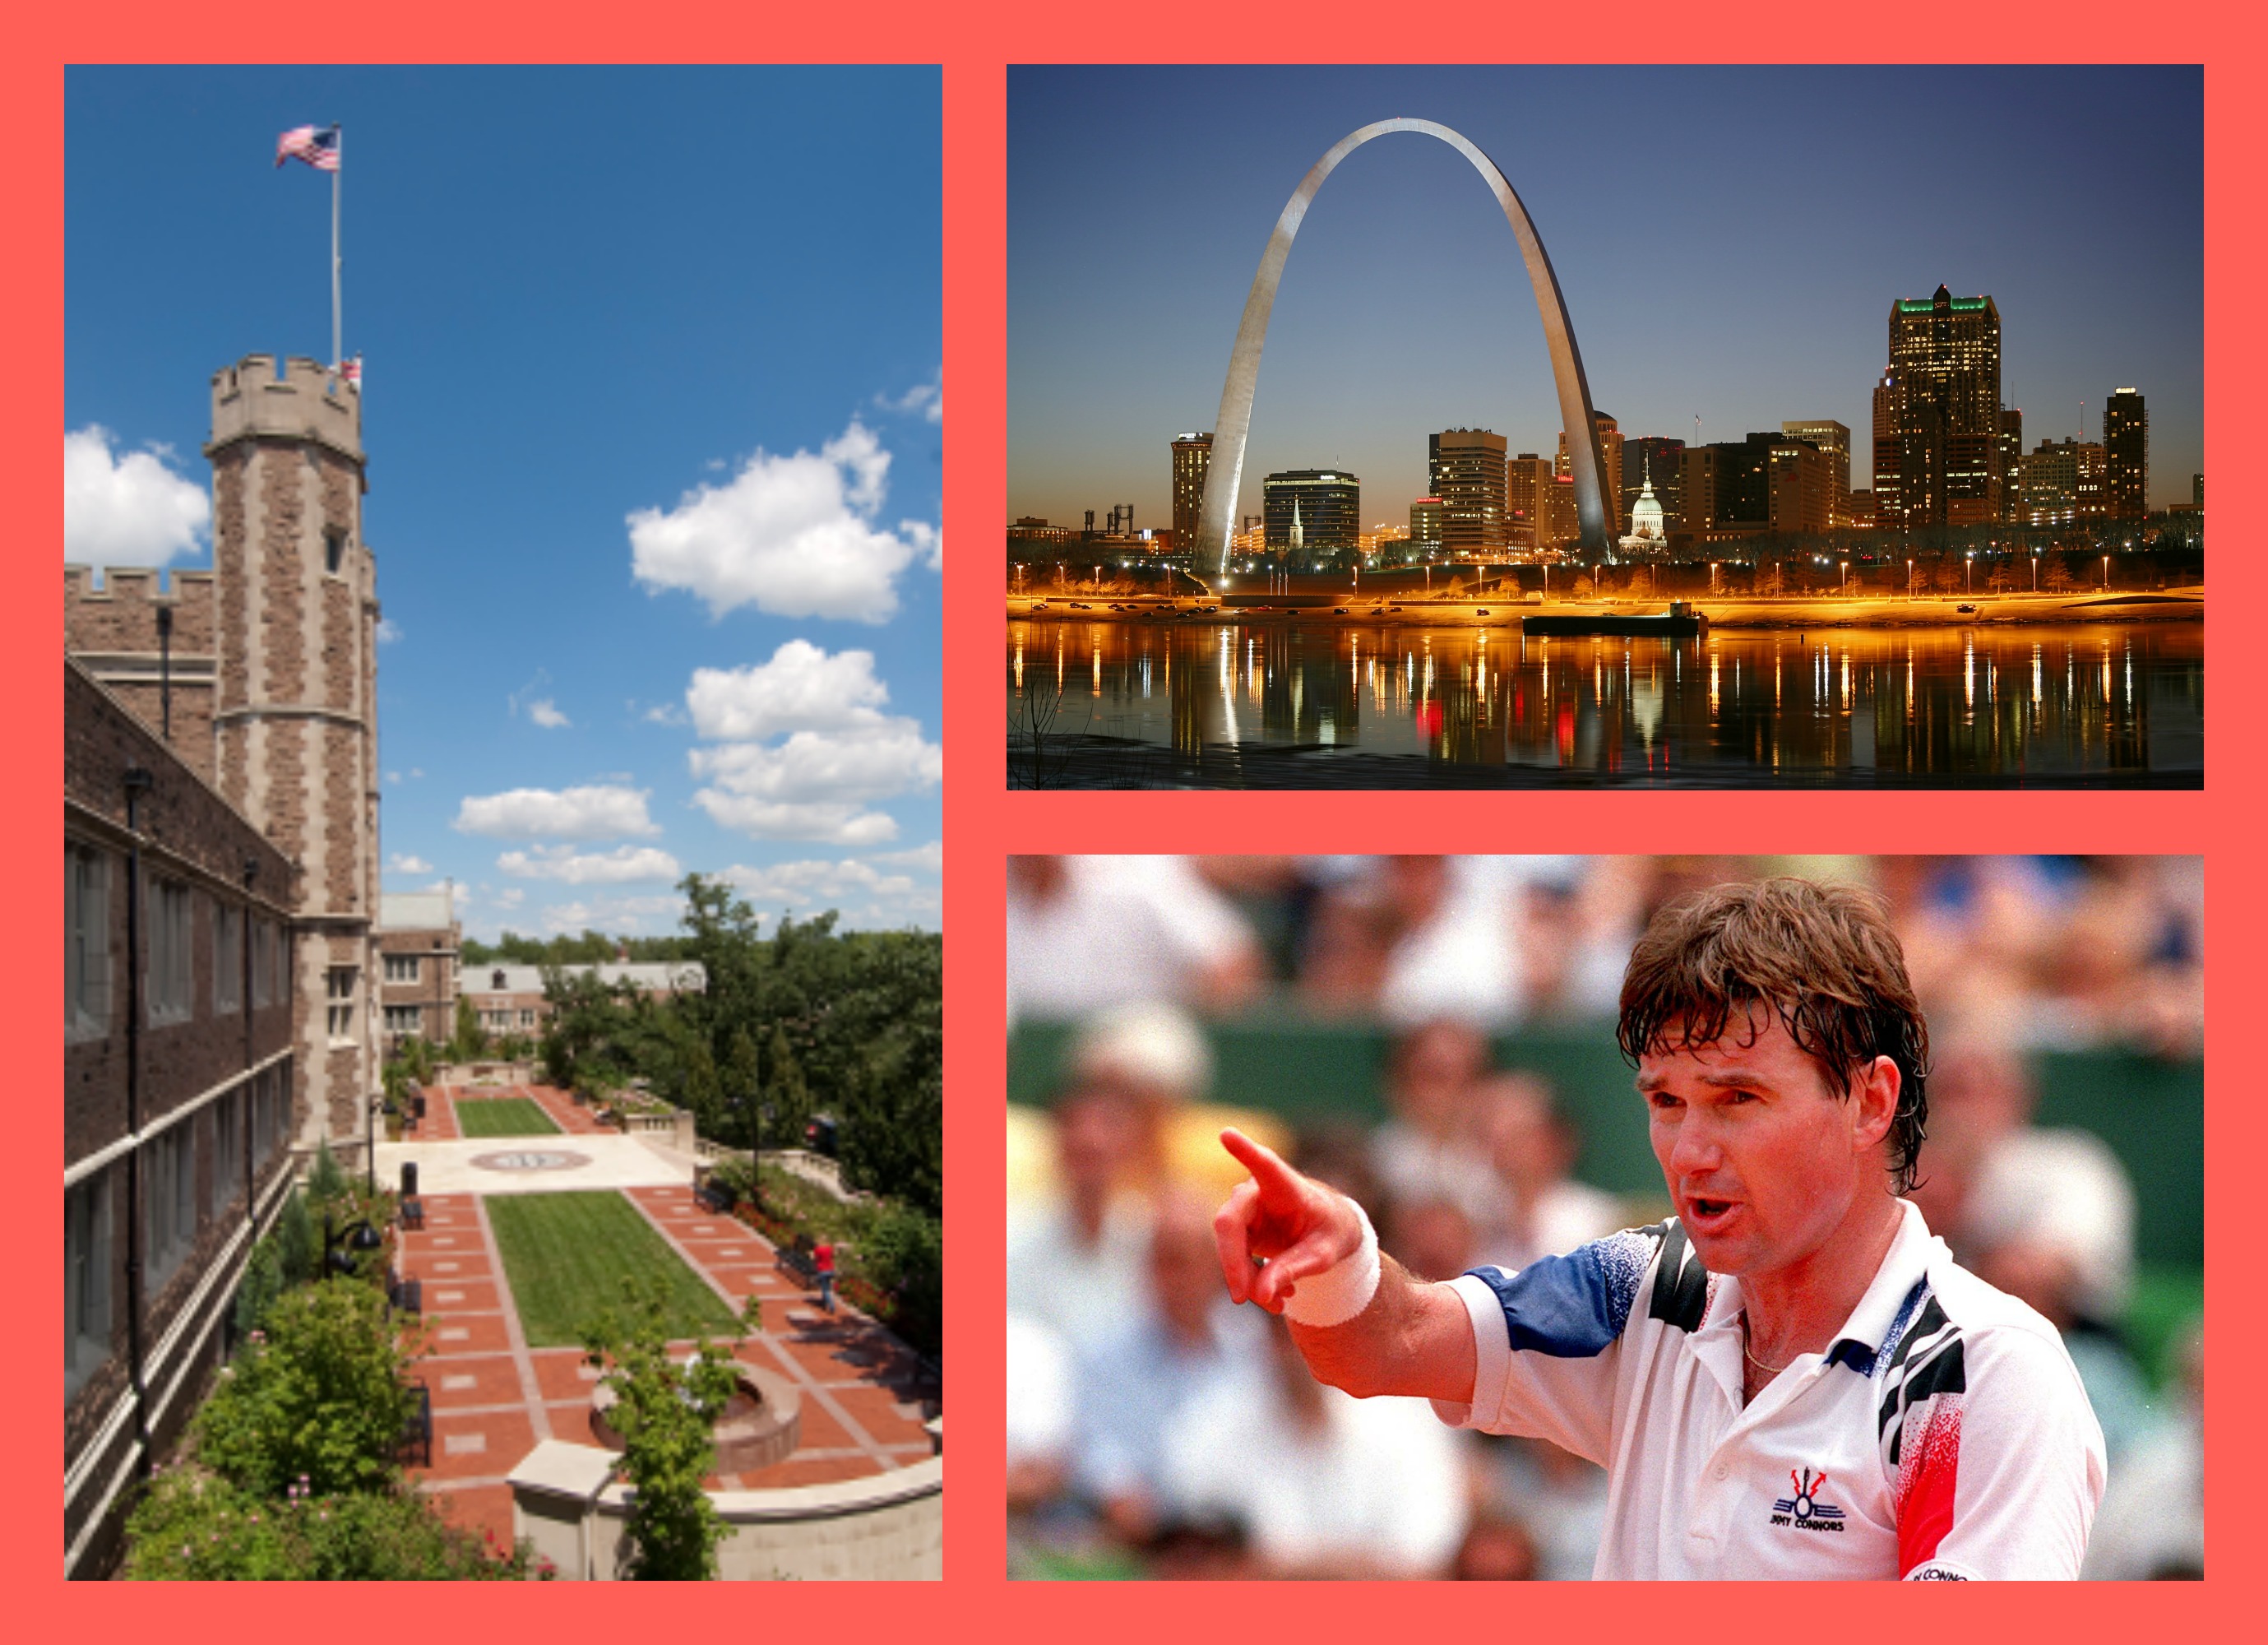 From left: Washington University campus, St. Louis skyline, Jimmy Connors